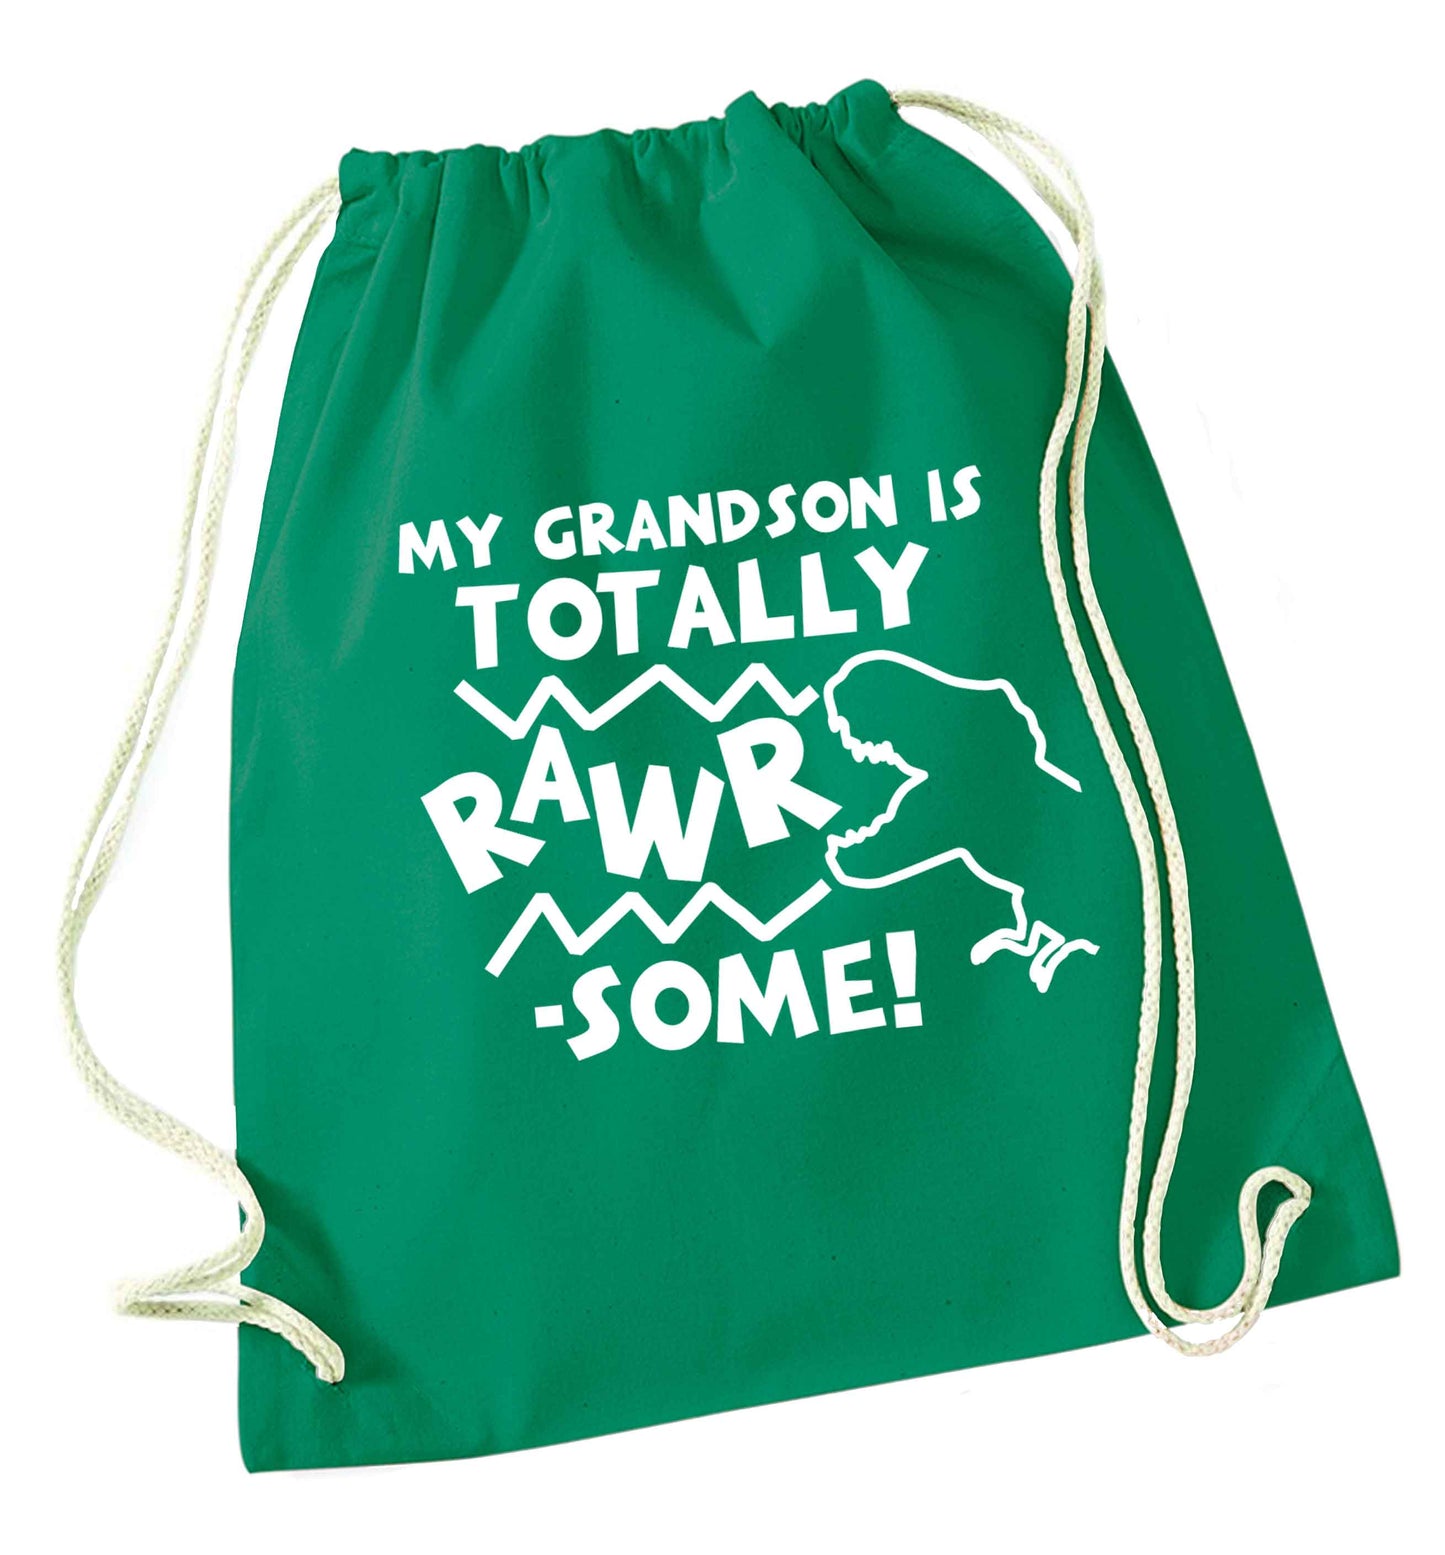 My grandson is totally rawrsome green drawstring bag